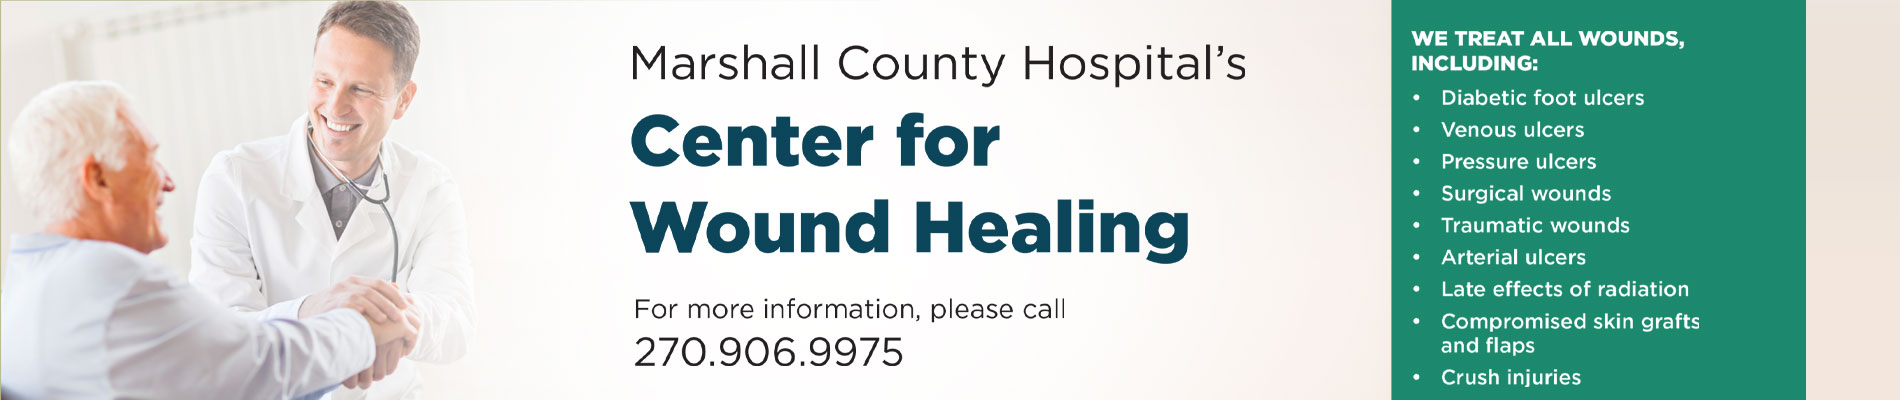 Marshall County Hospital's Center for Wound Healing
For more information, please call 270-906-9975

WE TREAT ALL WOUNDS, INCLUDING: Diabetic foot ulcers, Venous ulcers, Pressure ulcers, Surgical wounds, Traumatic wounds, Arterial ulcers, Late effects of radiation, Compromised skin grafts and flaps, Crush injuries